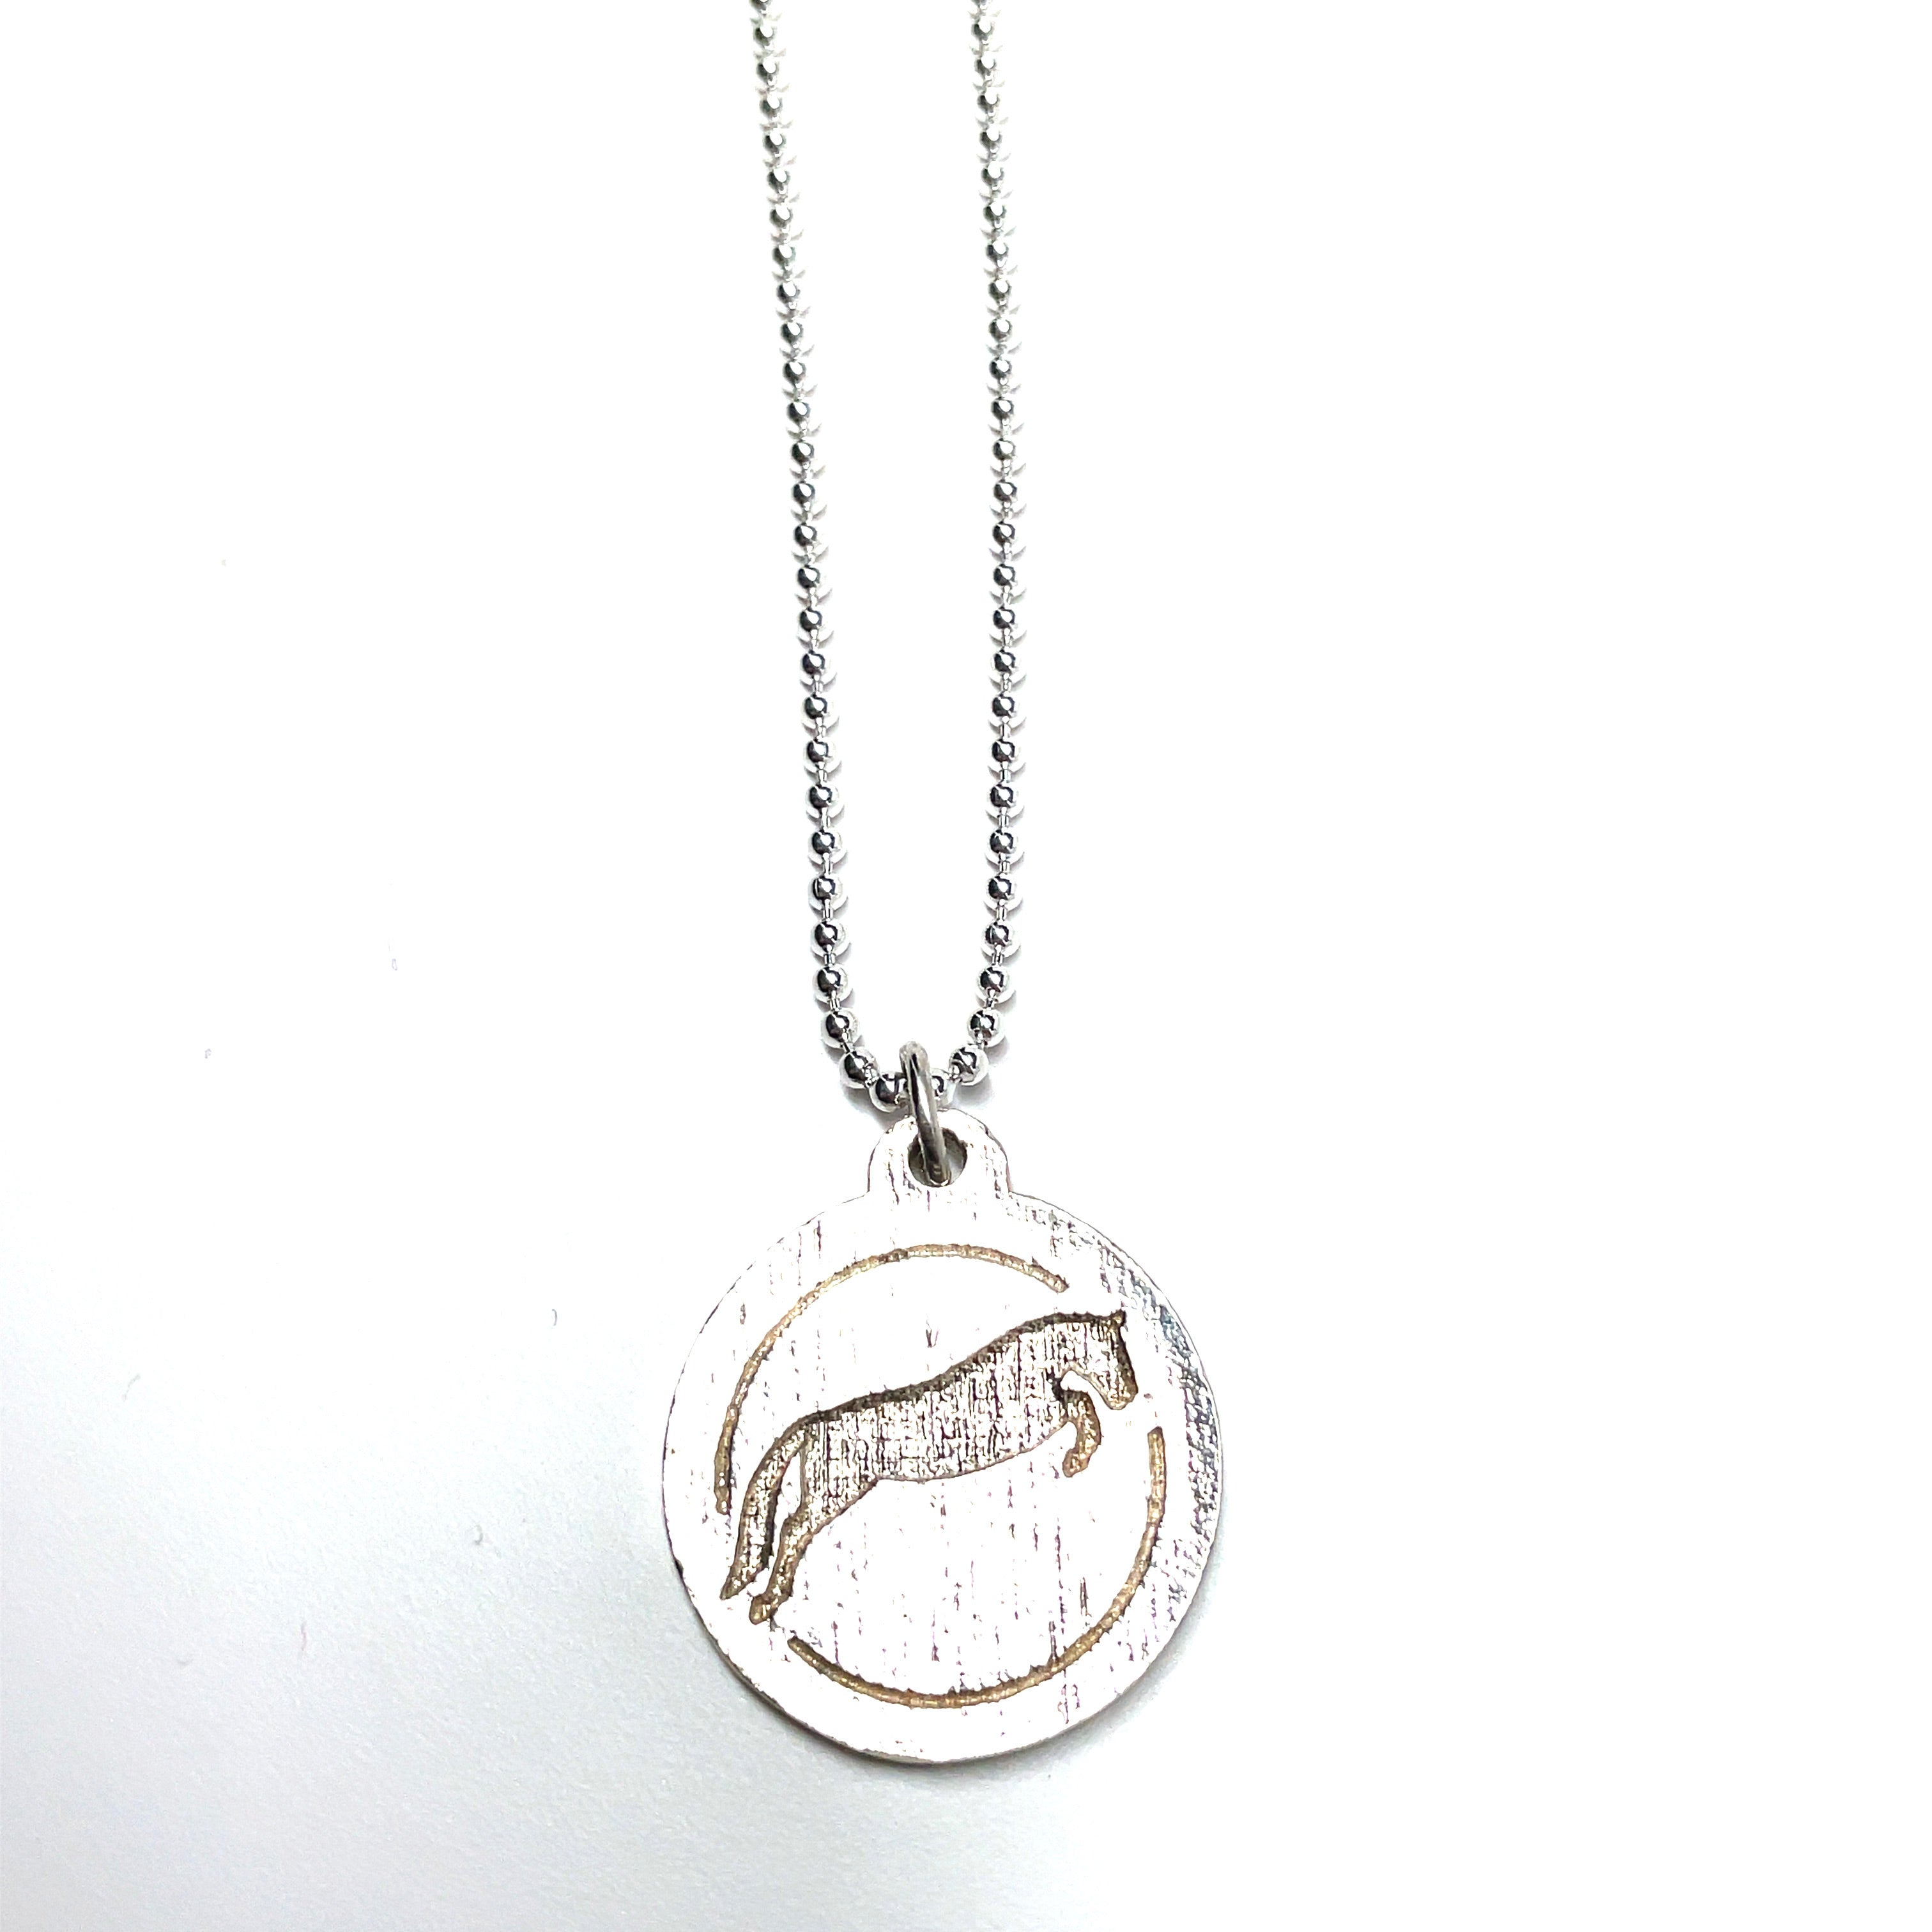 Showjumping necklace